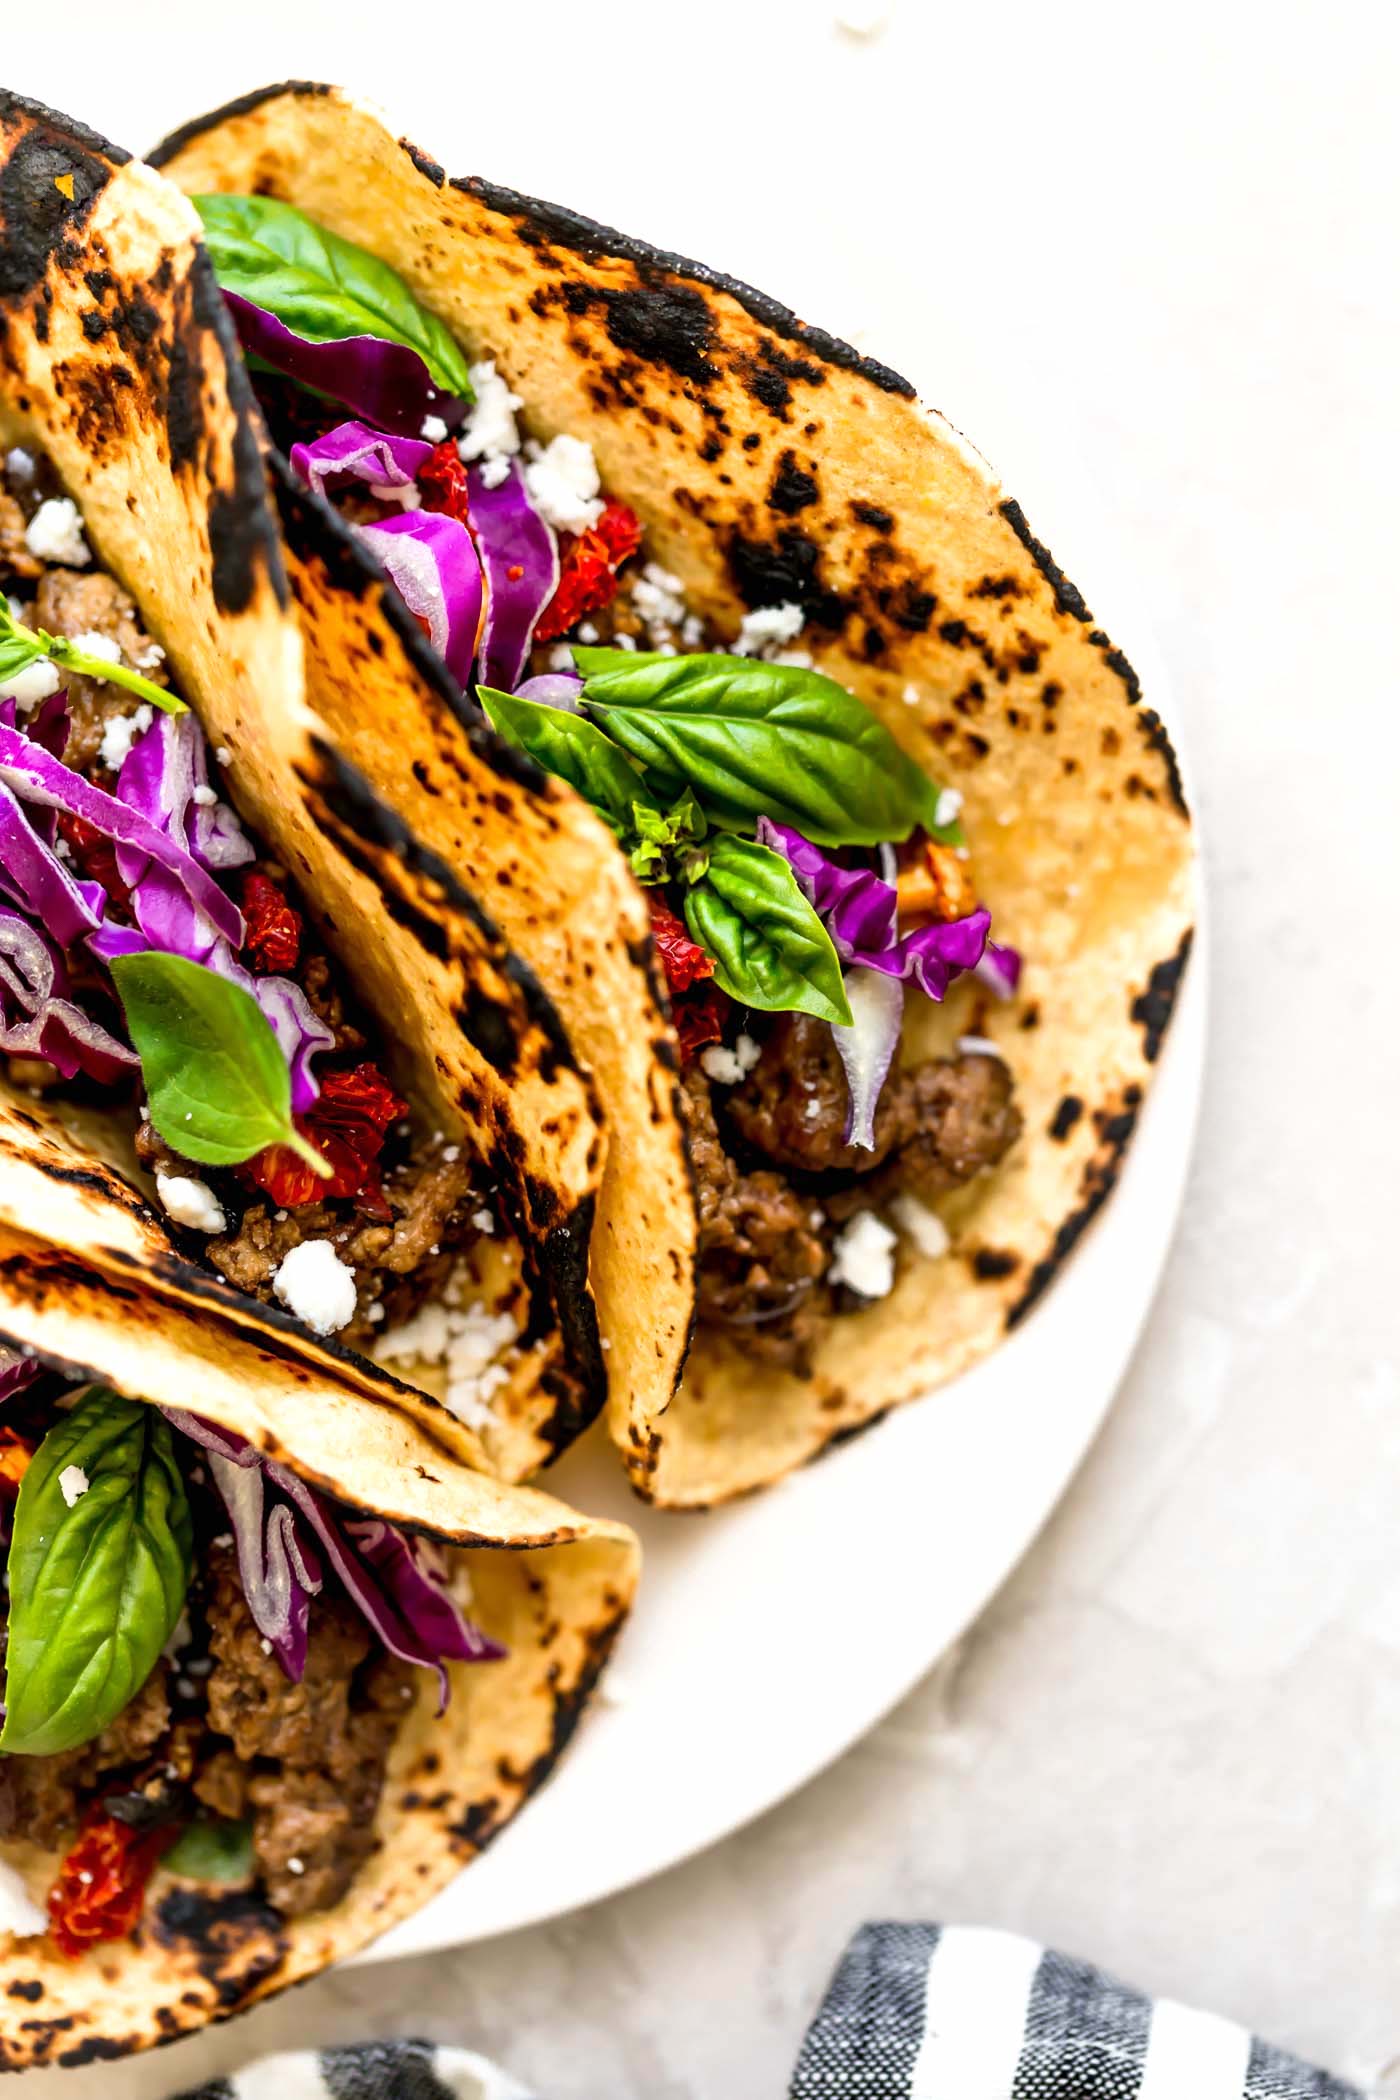 Greek lamb tacos in charred tortillas with purple cabbage and fresh herbs on top